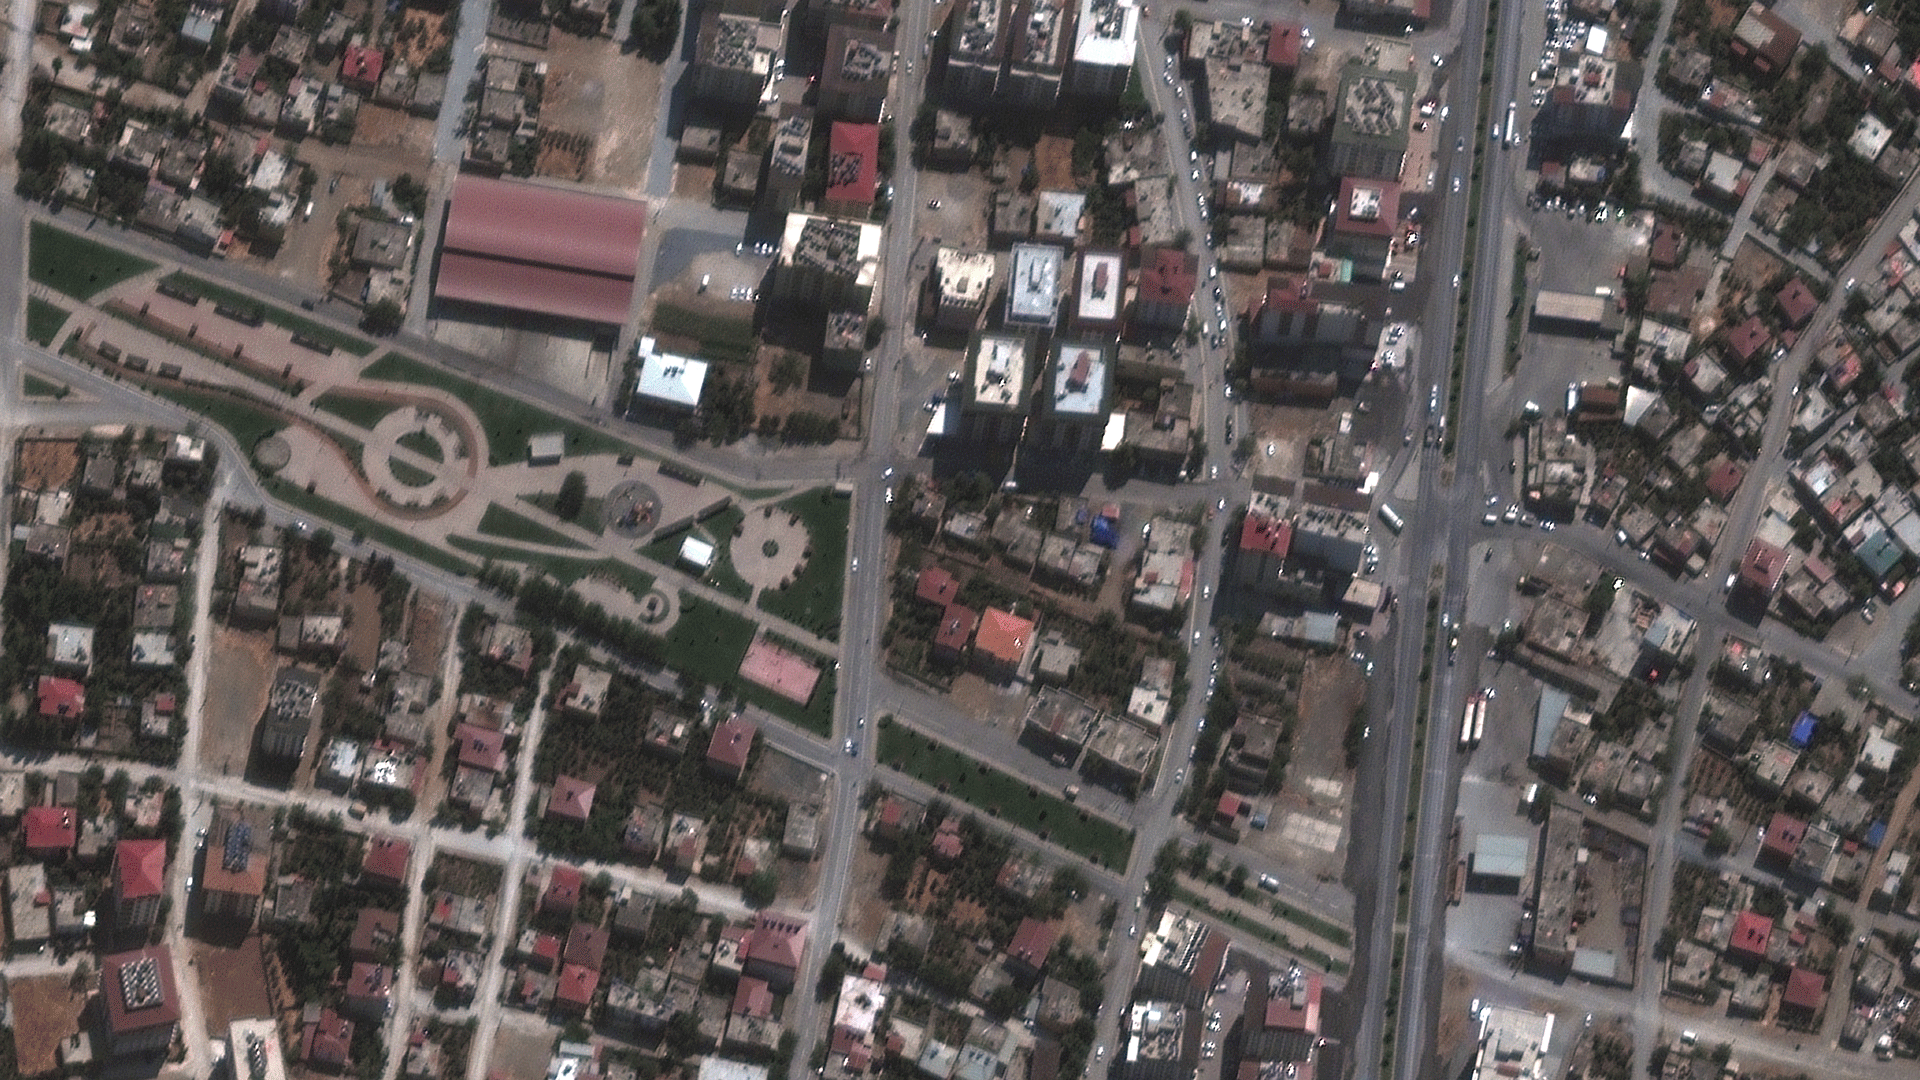 Buildings in Nurdagi, Turkey before and after the earthquake